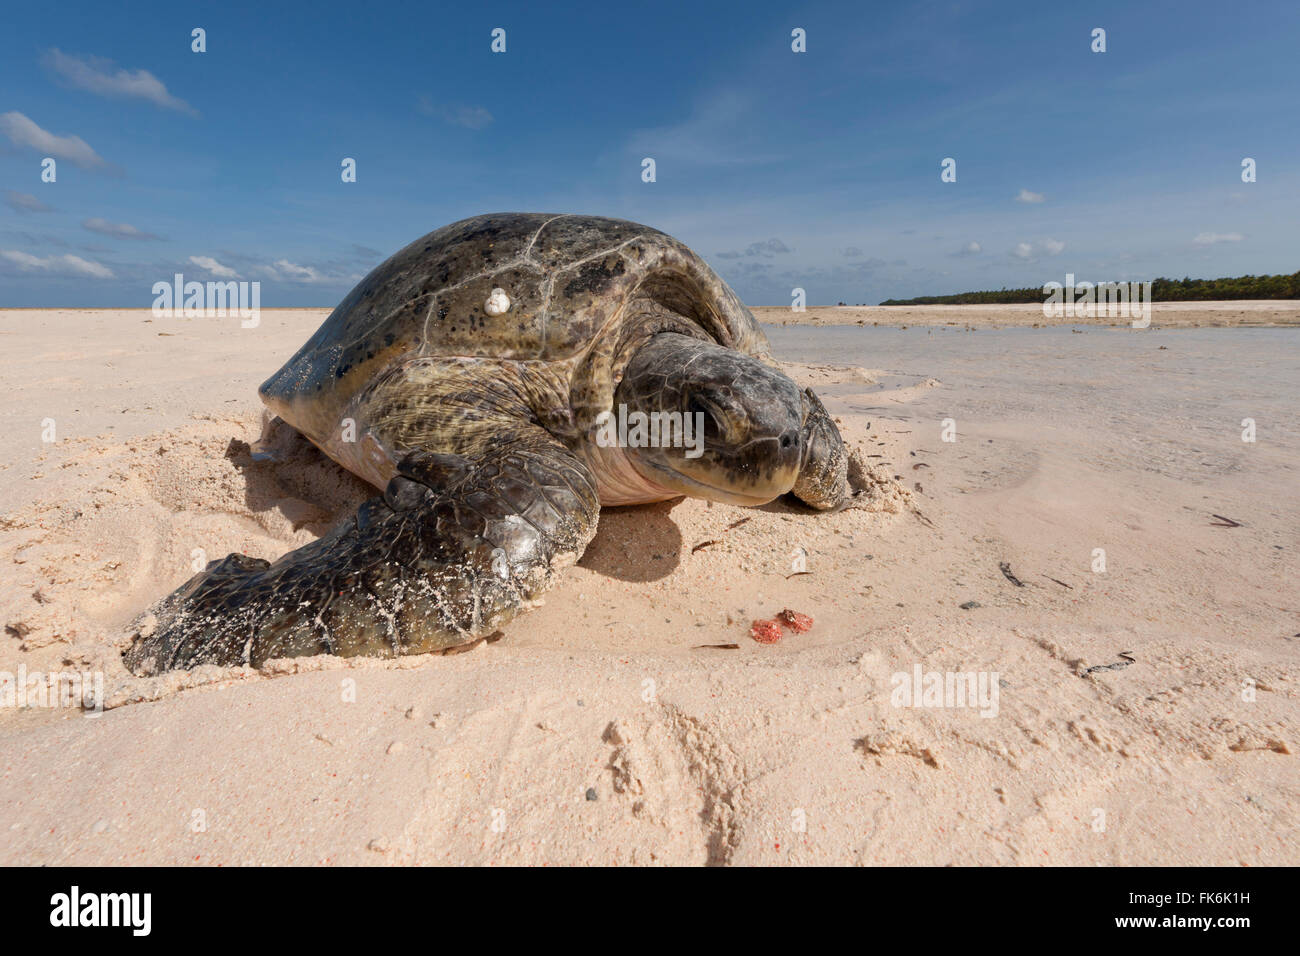 Green turtle (Chelonia mydas) mother struggles to make her way back to sea after laying her eggs on the beach. The strong mornin Stock Photo